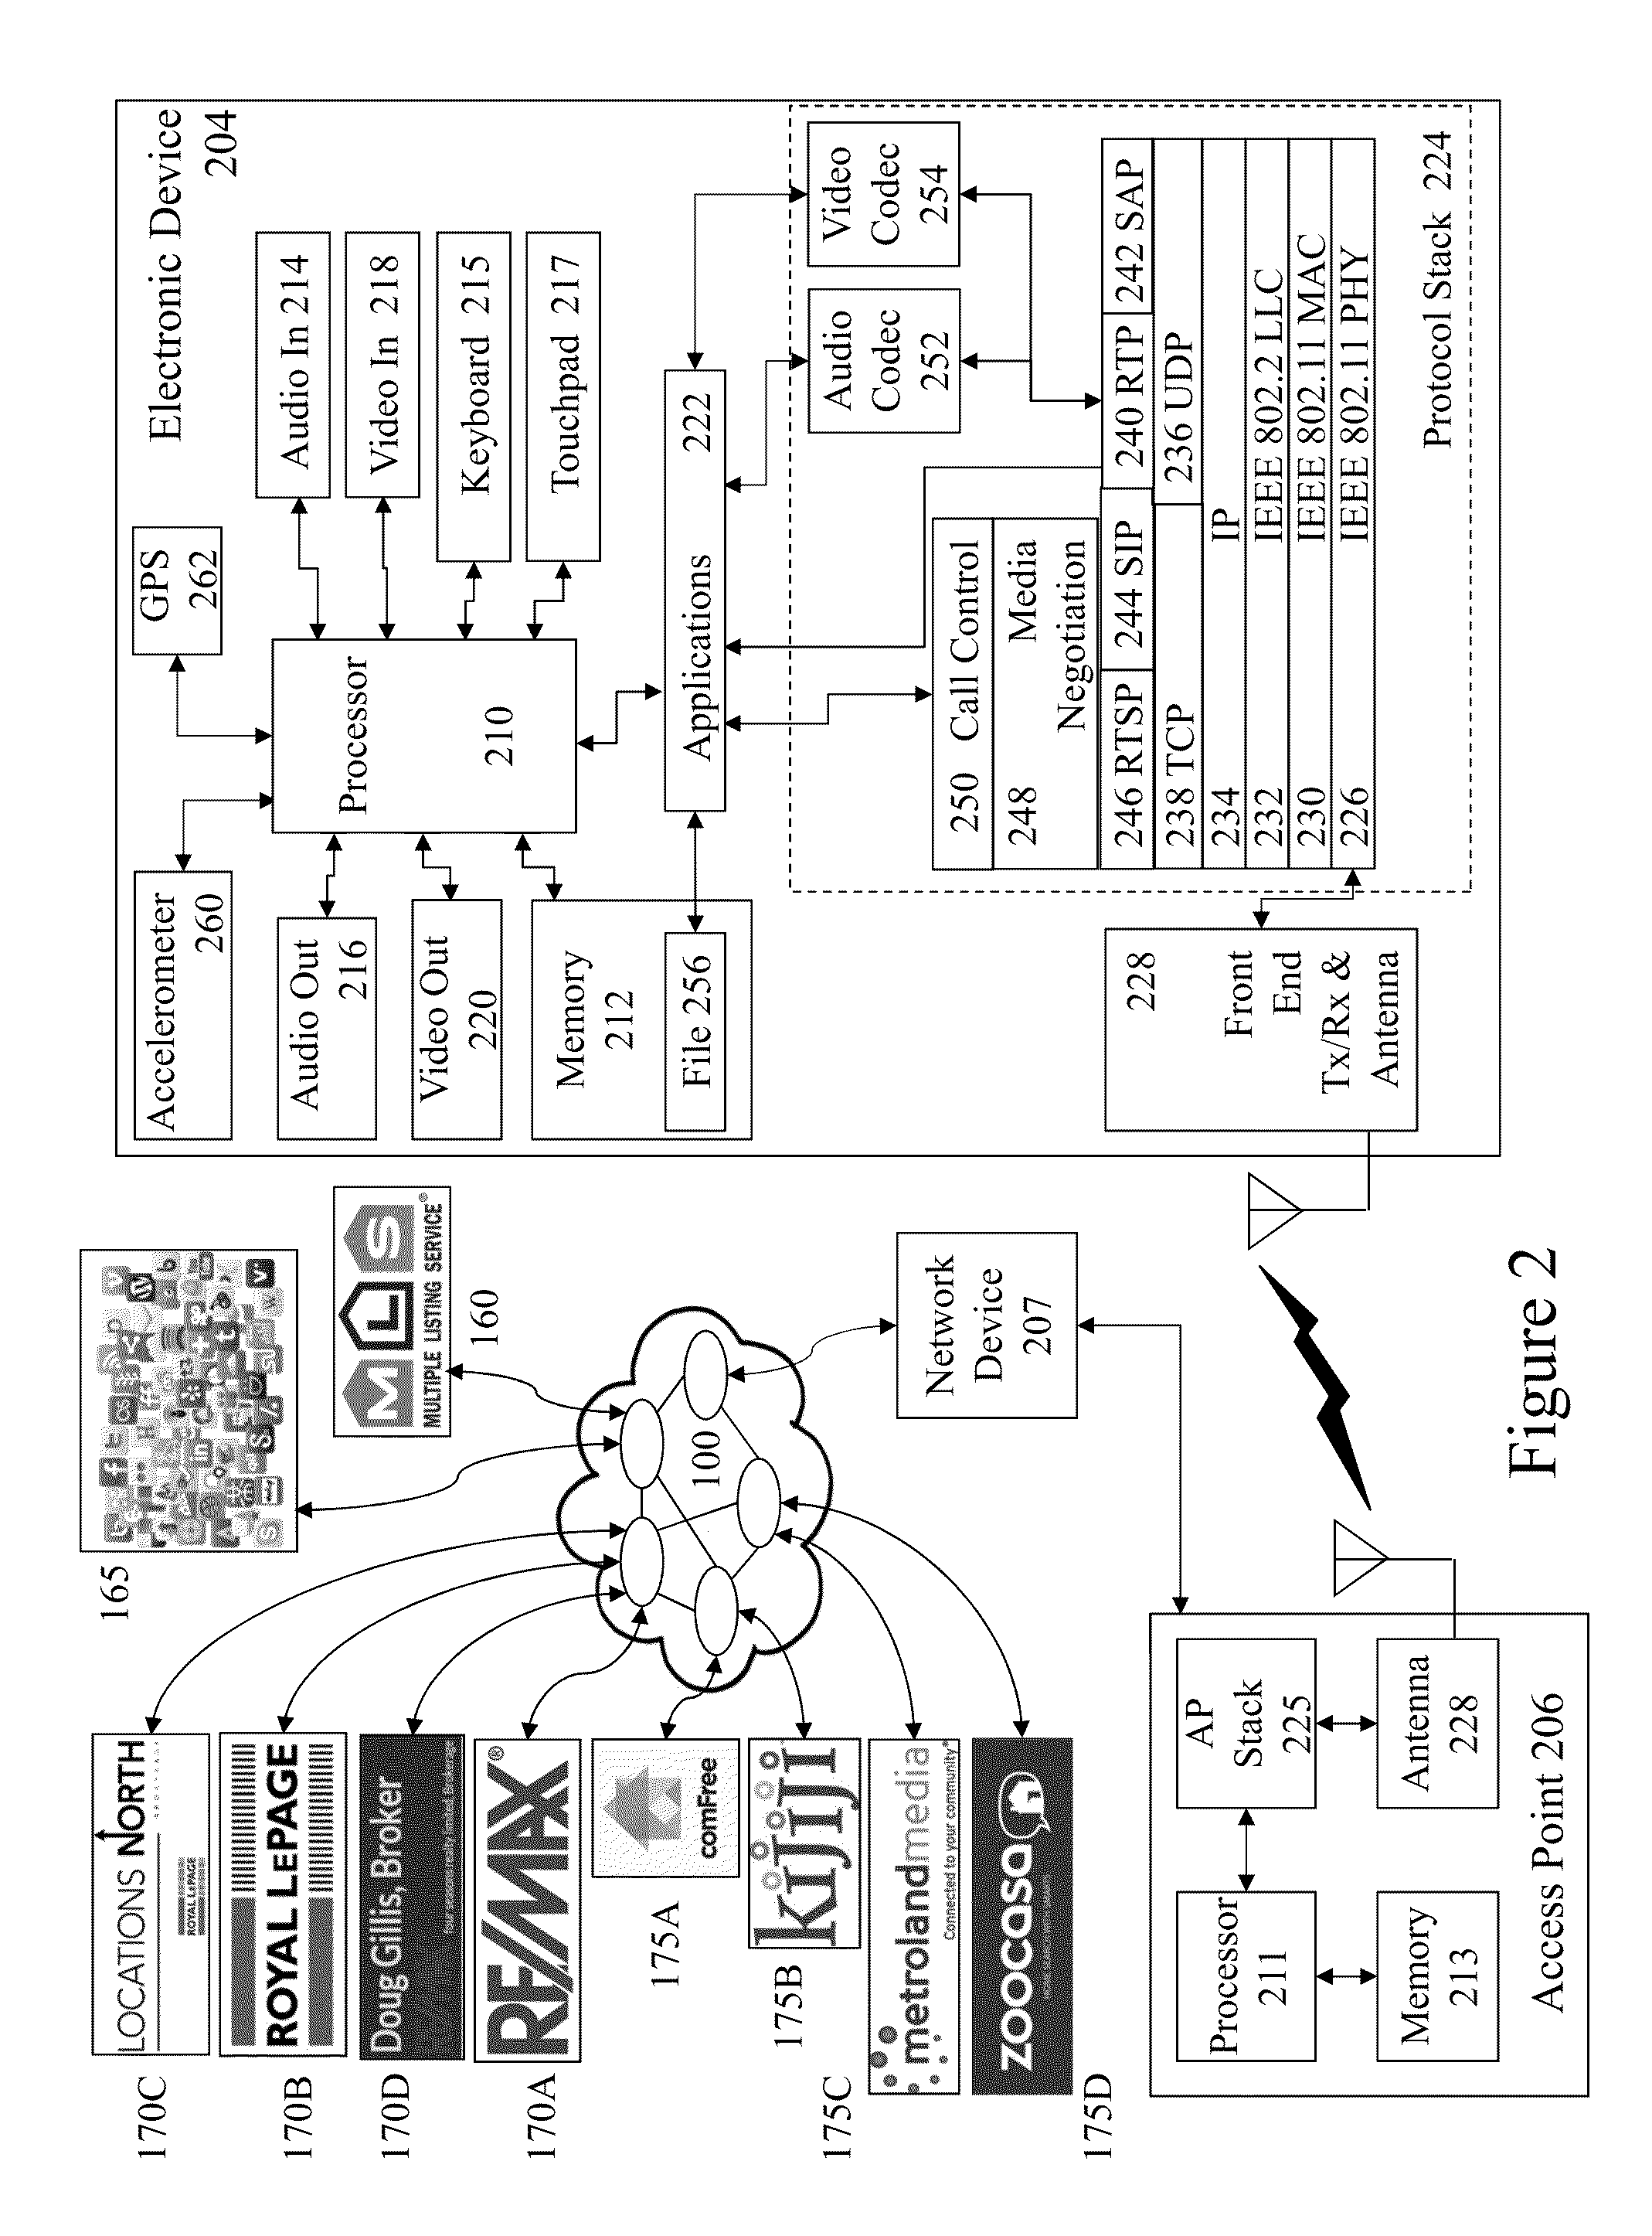 Dynamic contact management systems and methods